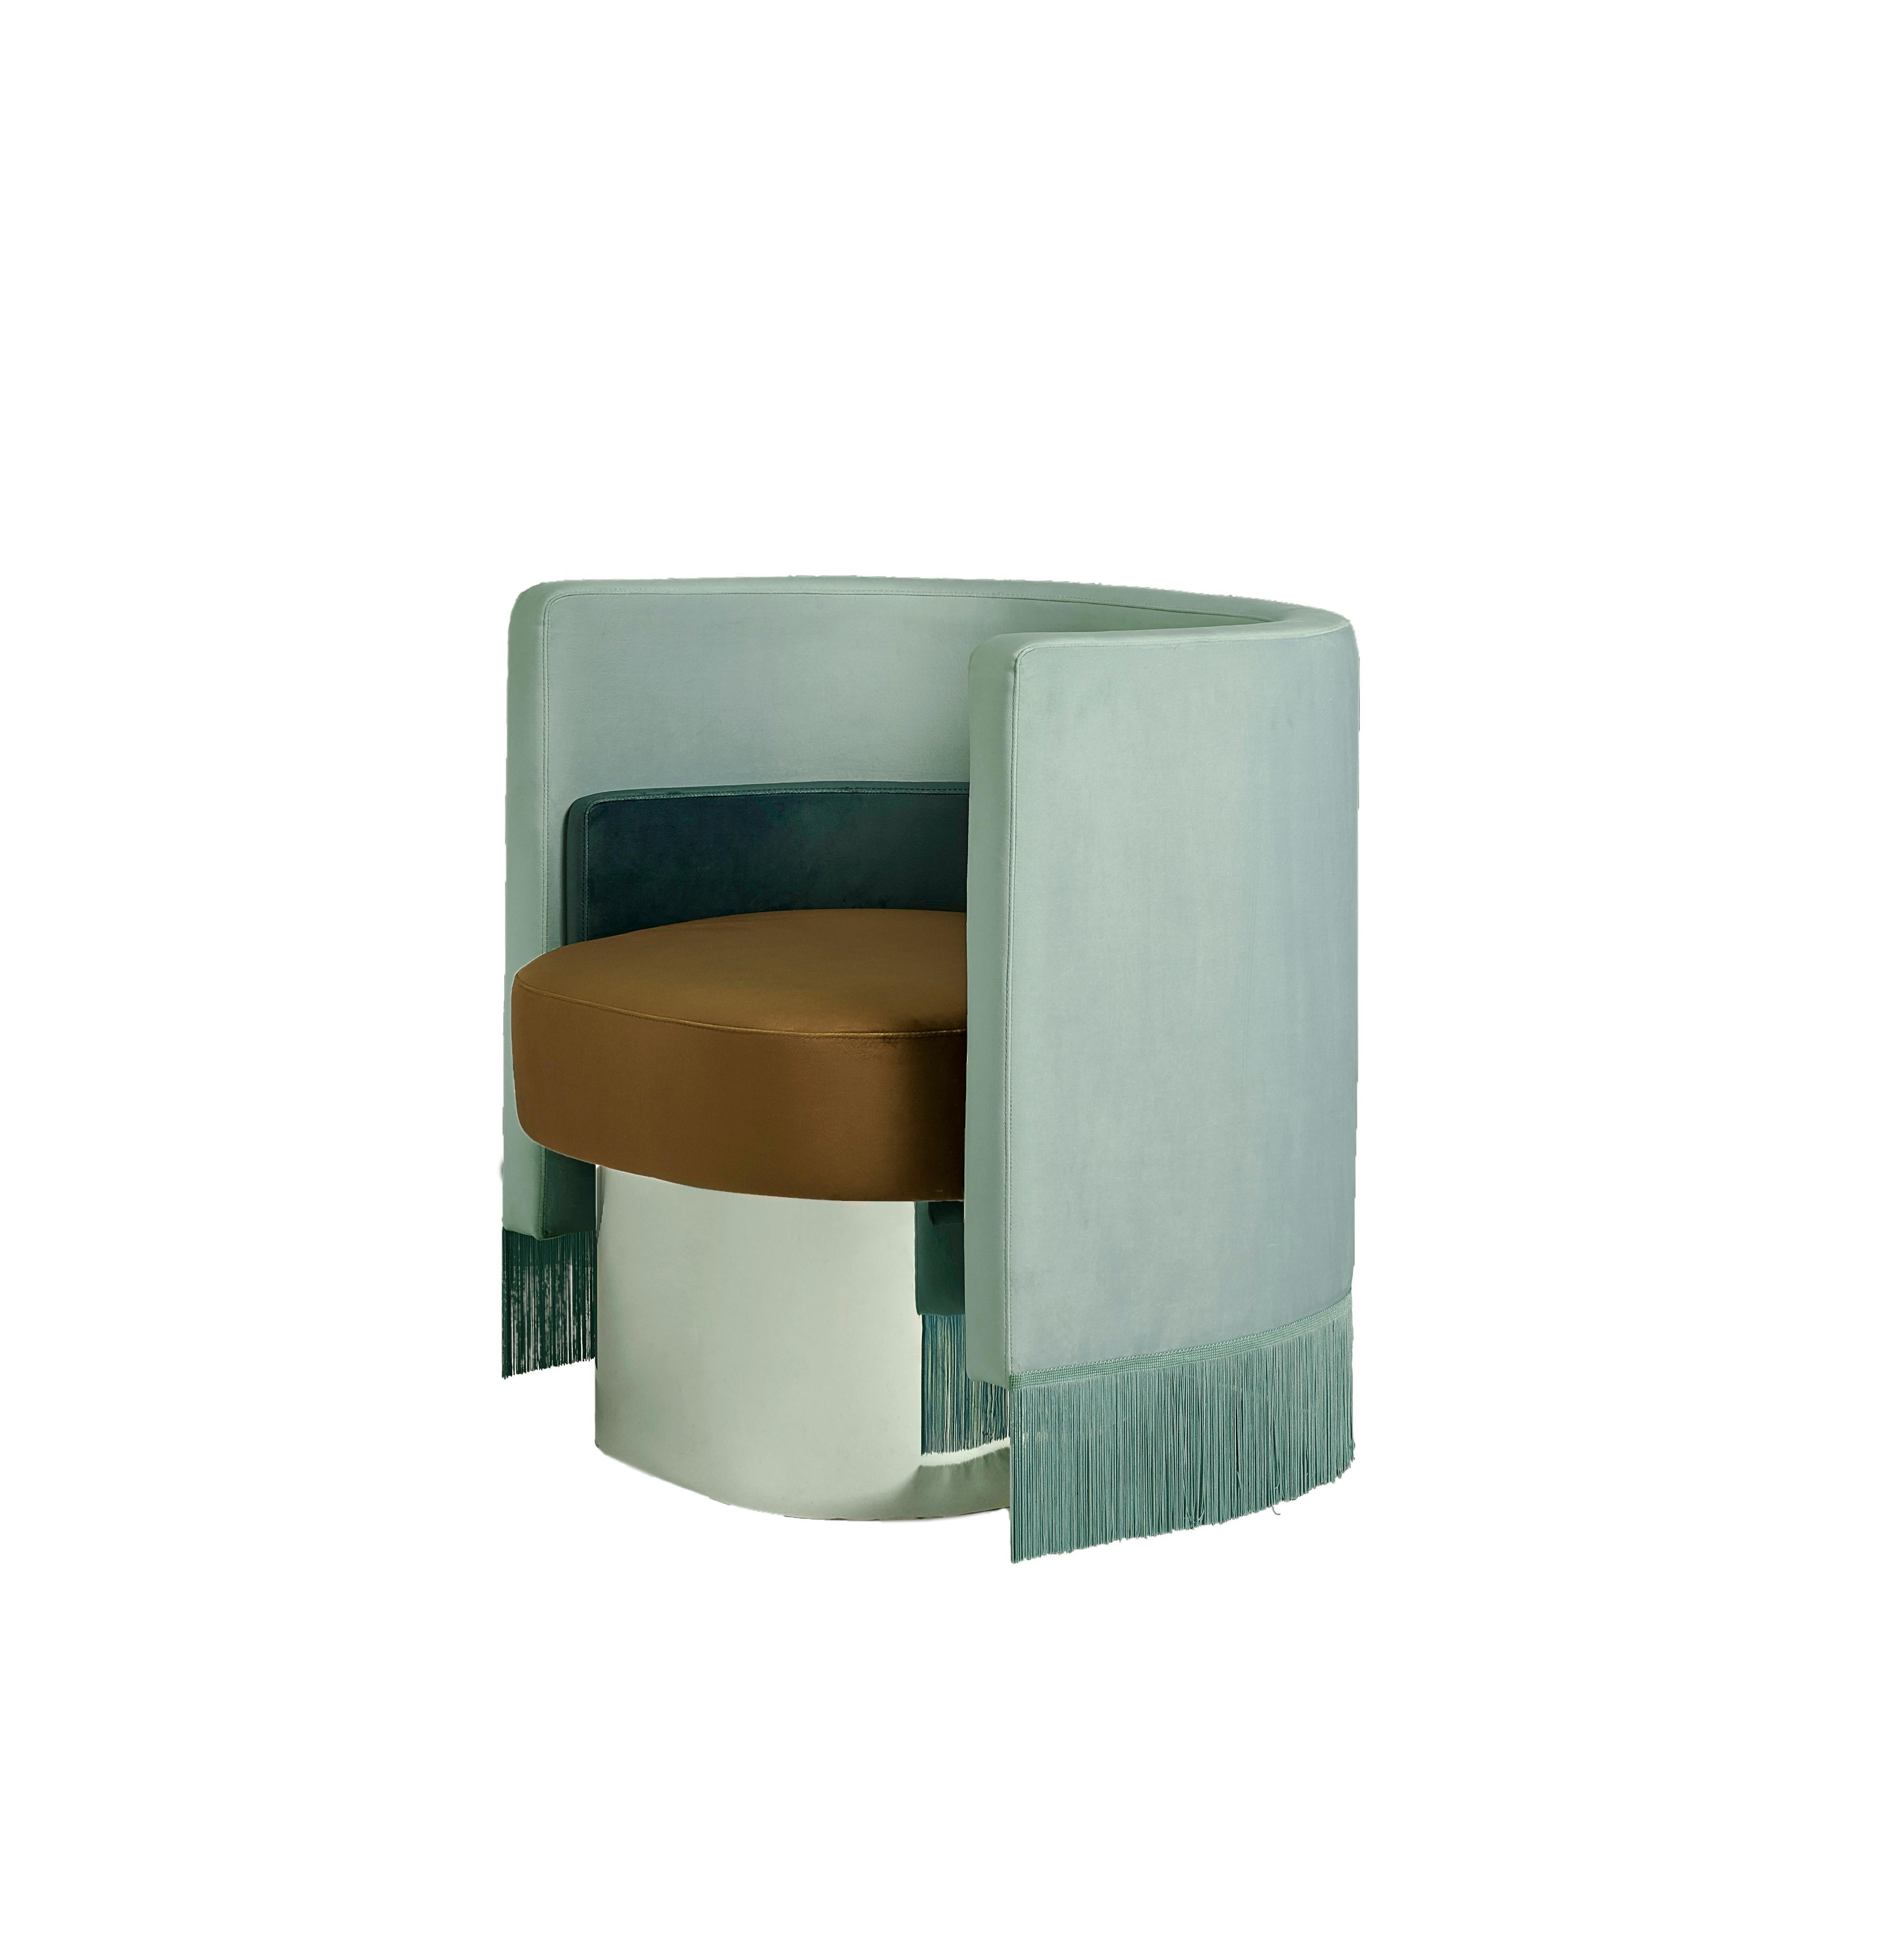 Mambo Green Armchair with Upholstery Velvet, Solid Wood and Metal Structure (Sonstiges) im Angebot